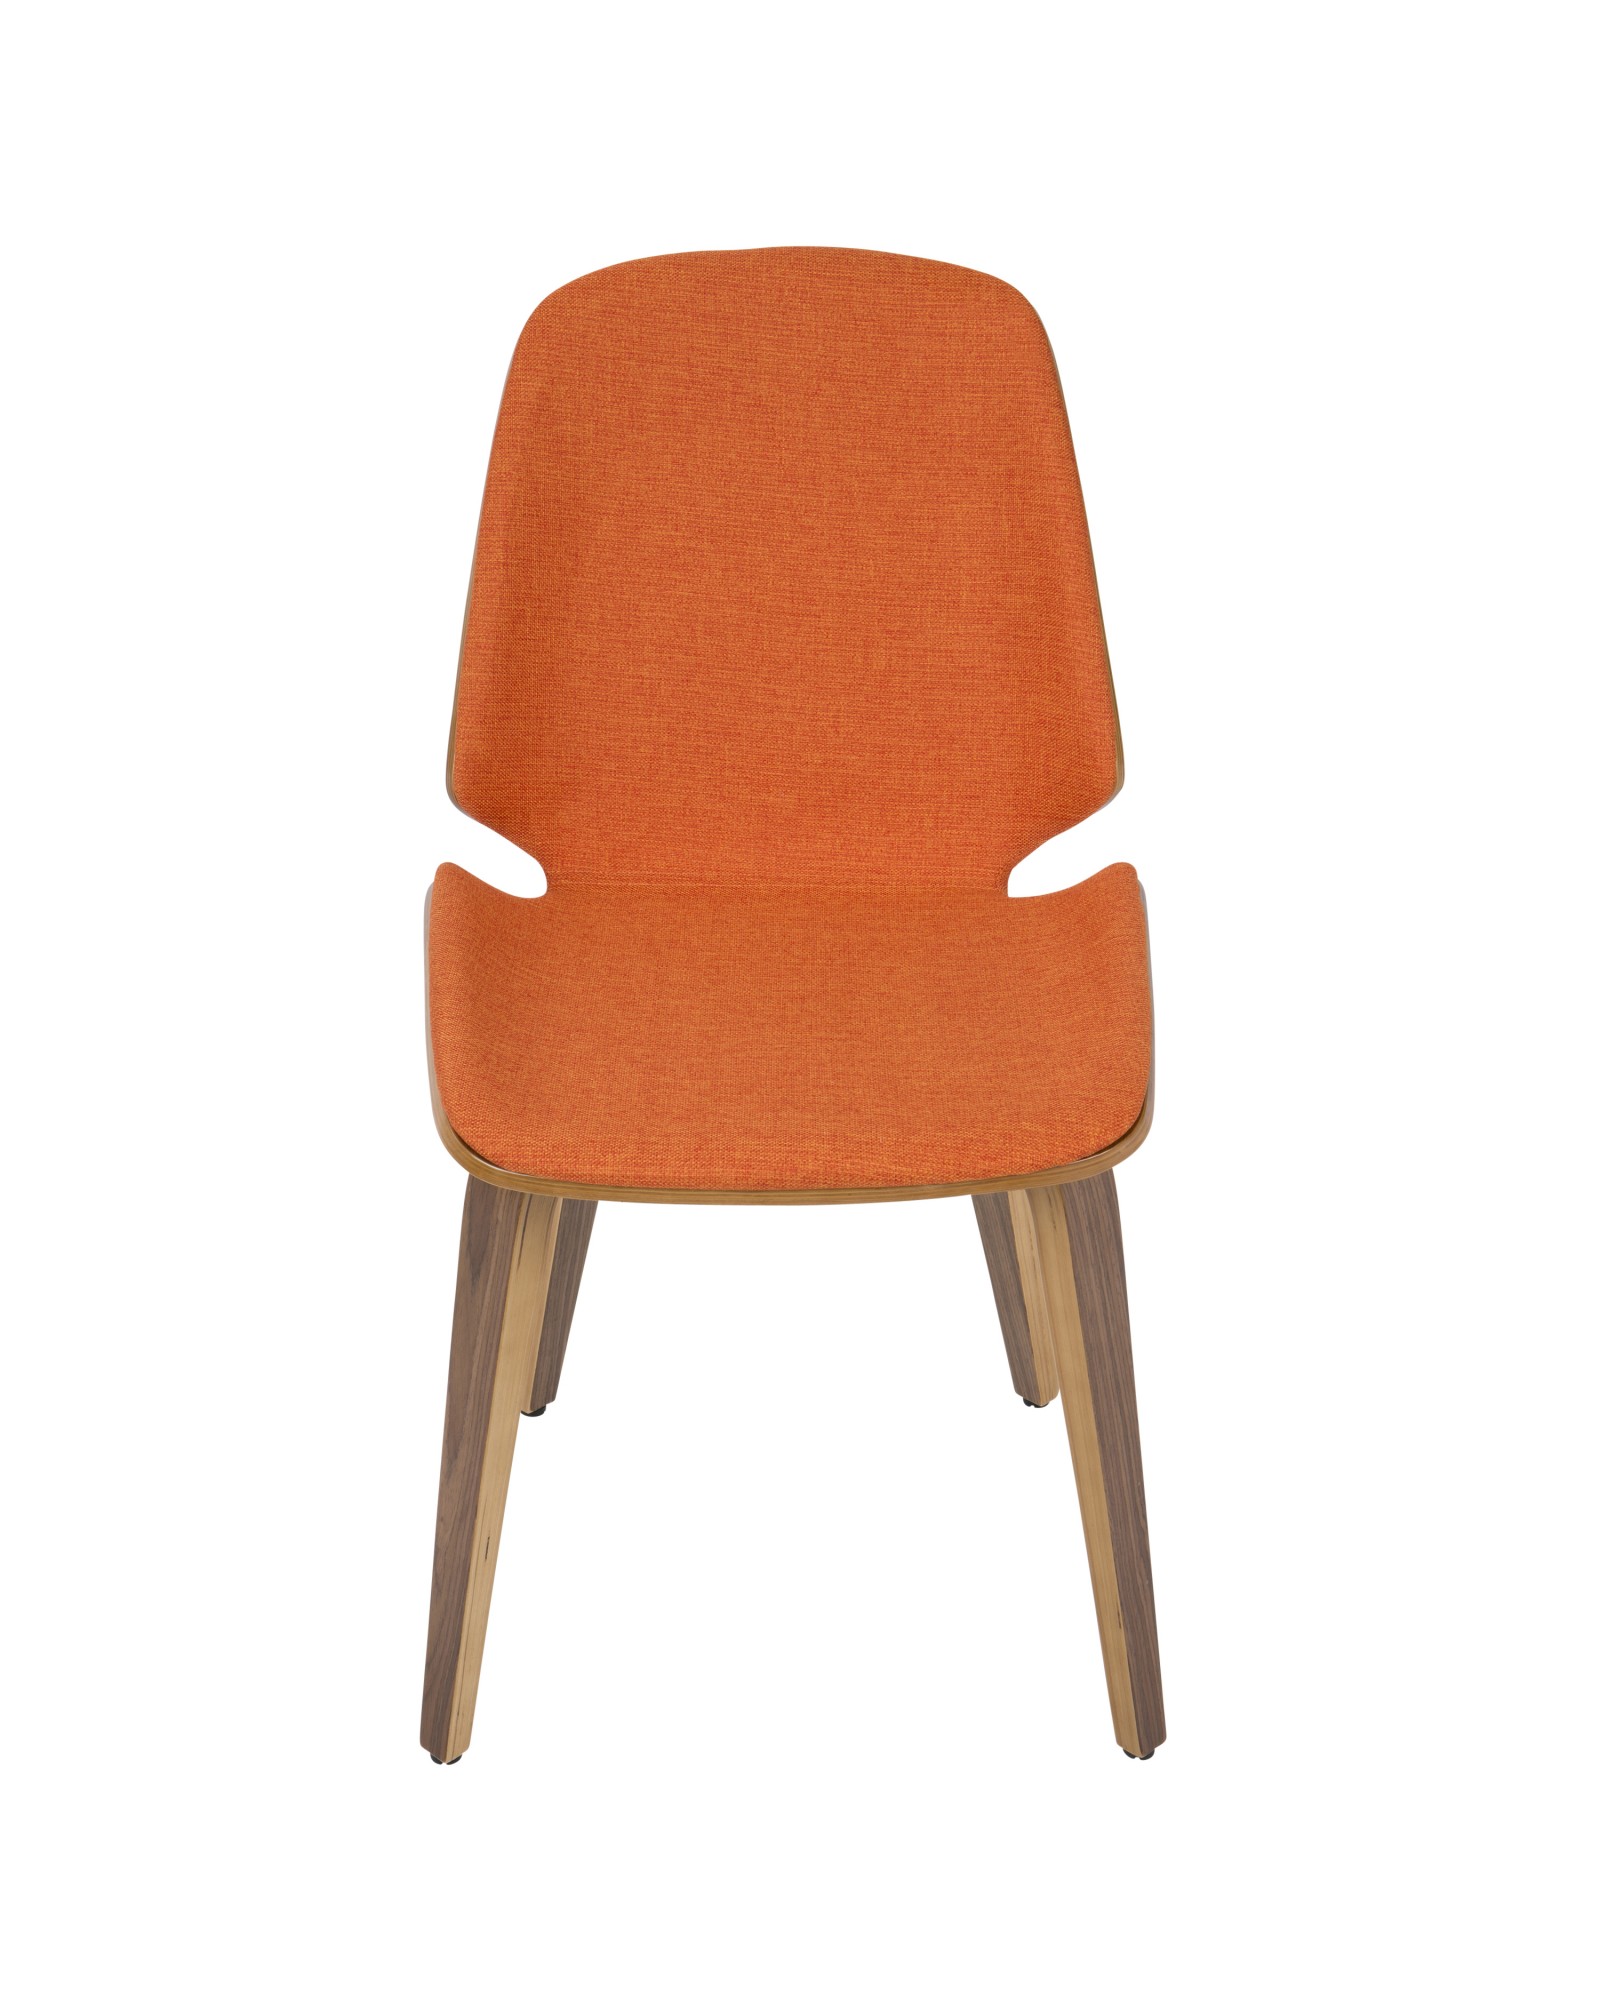 Serena Mid-Century Modern Dining Chair in Walnut with Orange Fabric - Set of 2